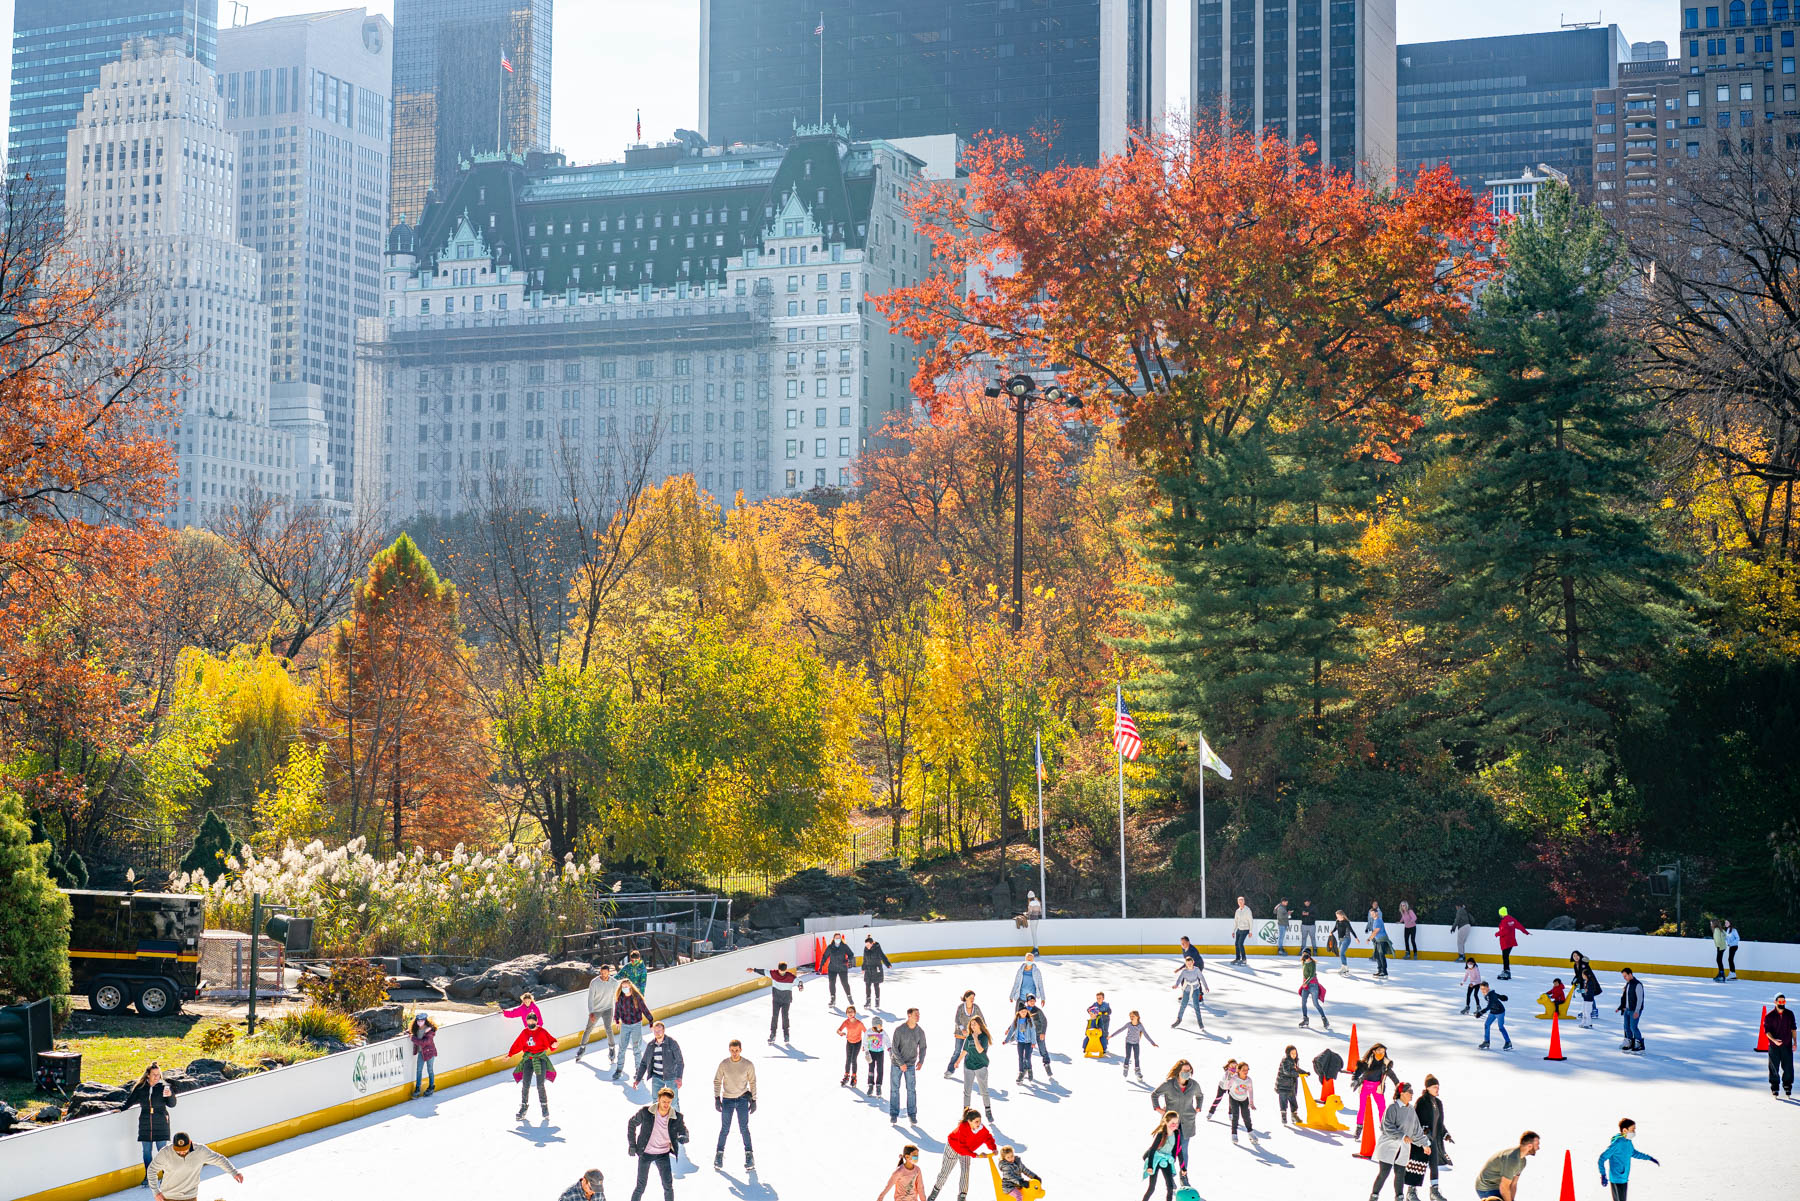 Visiting New York City in January, Wollman Rink